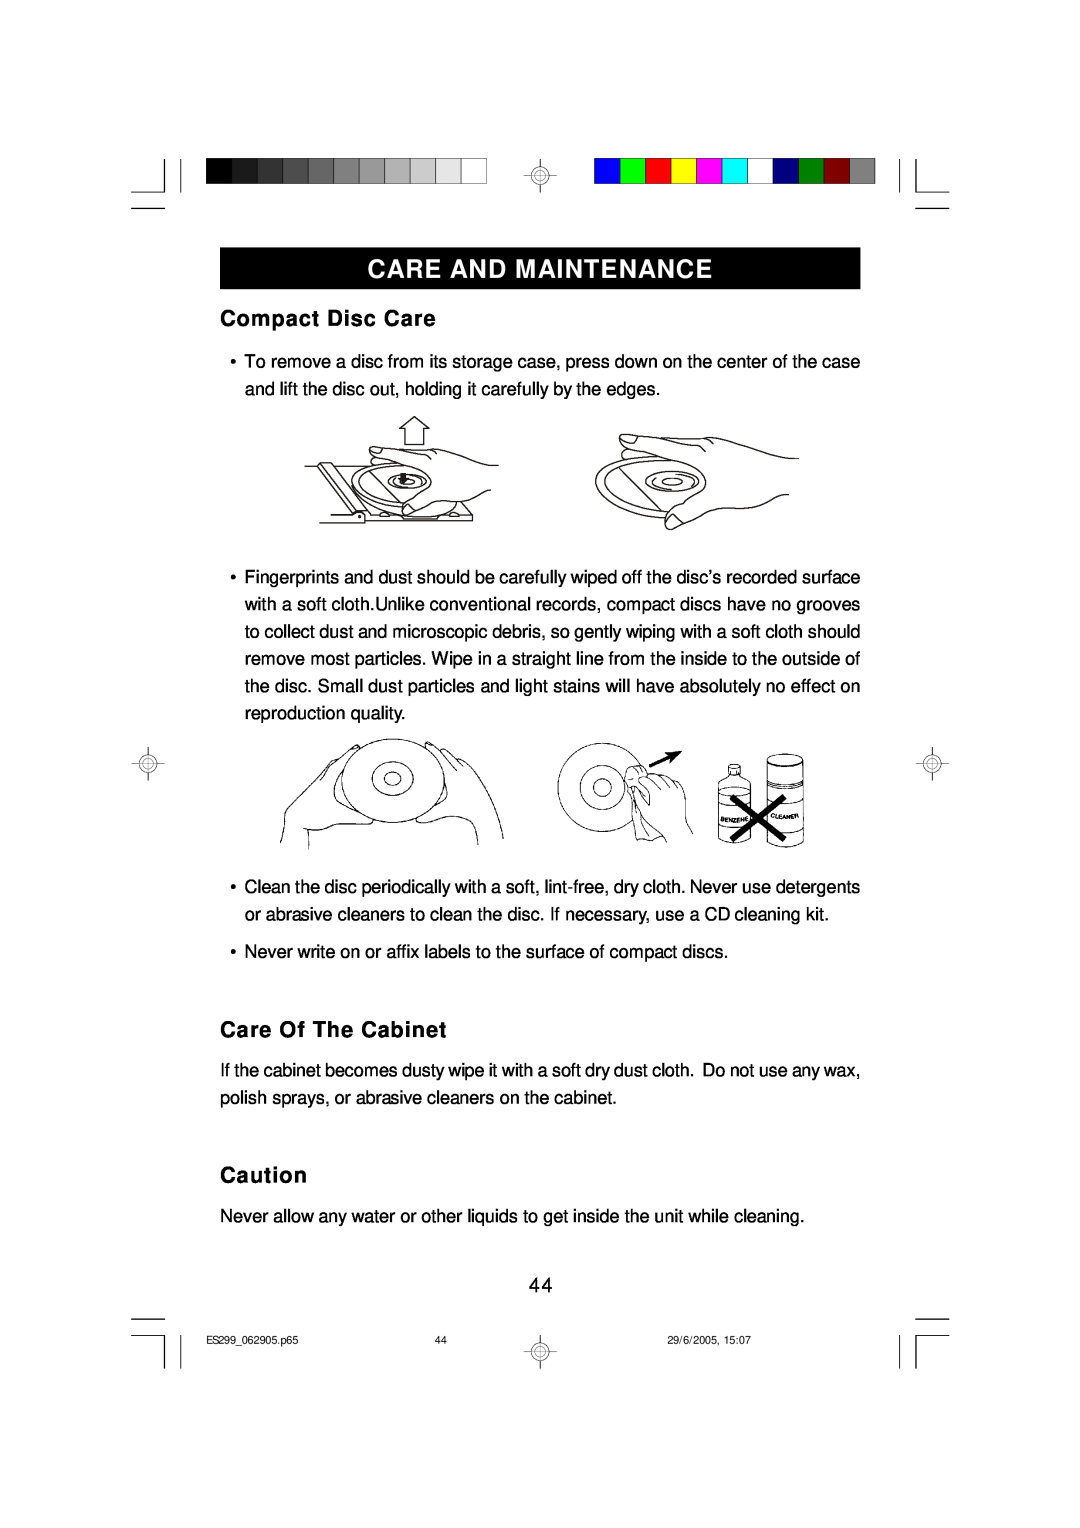 Emerson ES299 owner manual Care And Maintenance, Compact Disc Care, Care Of The Cabinet 